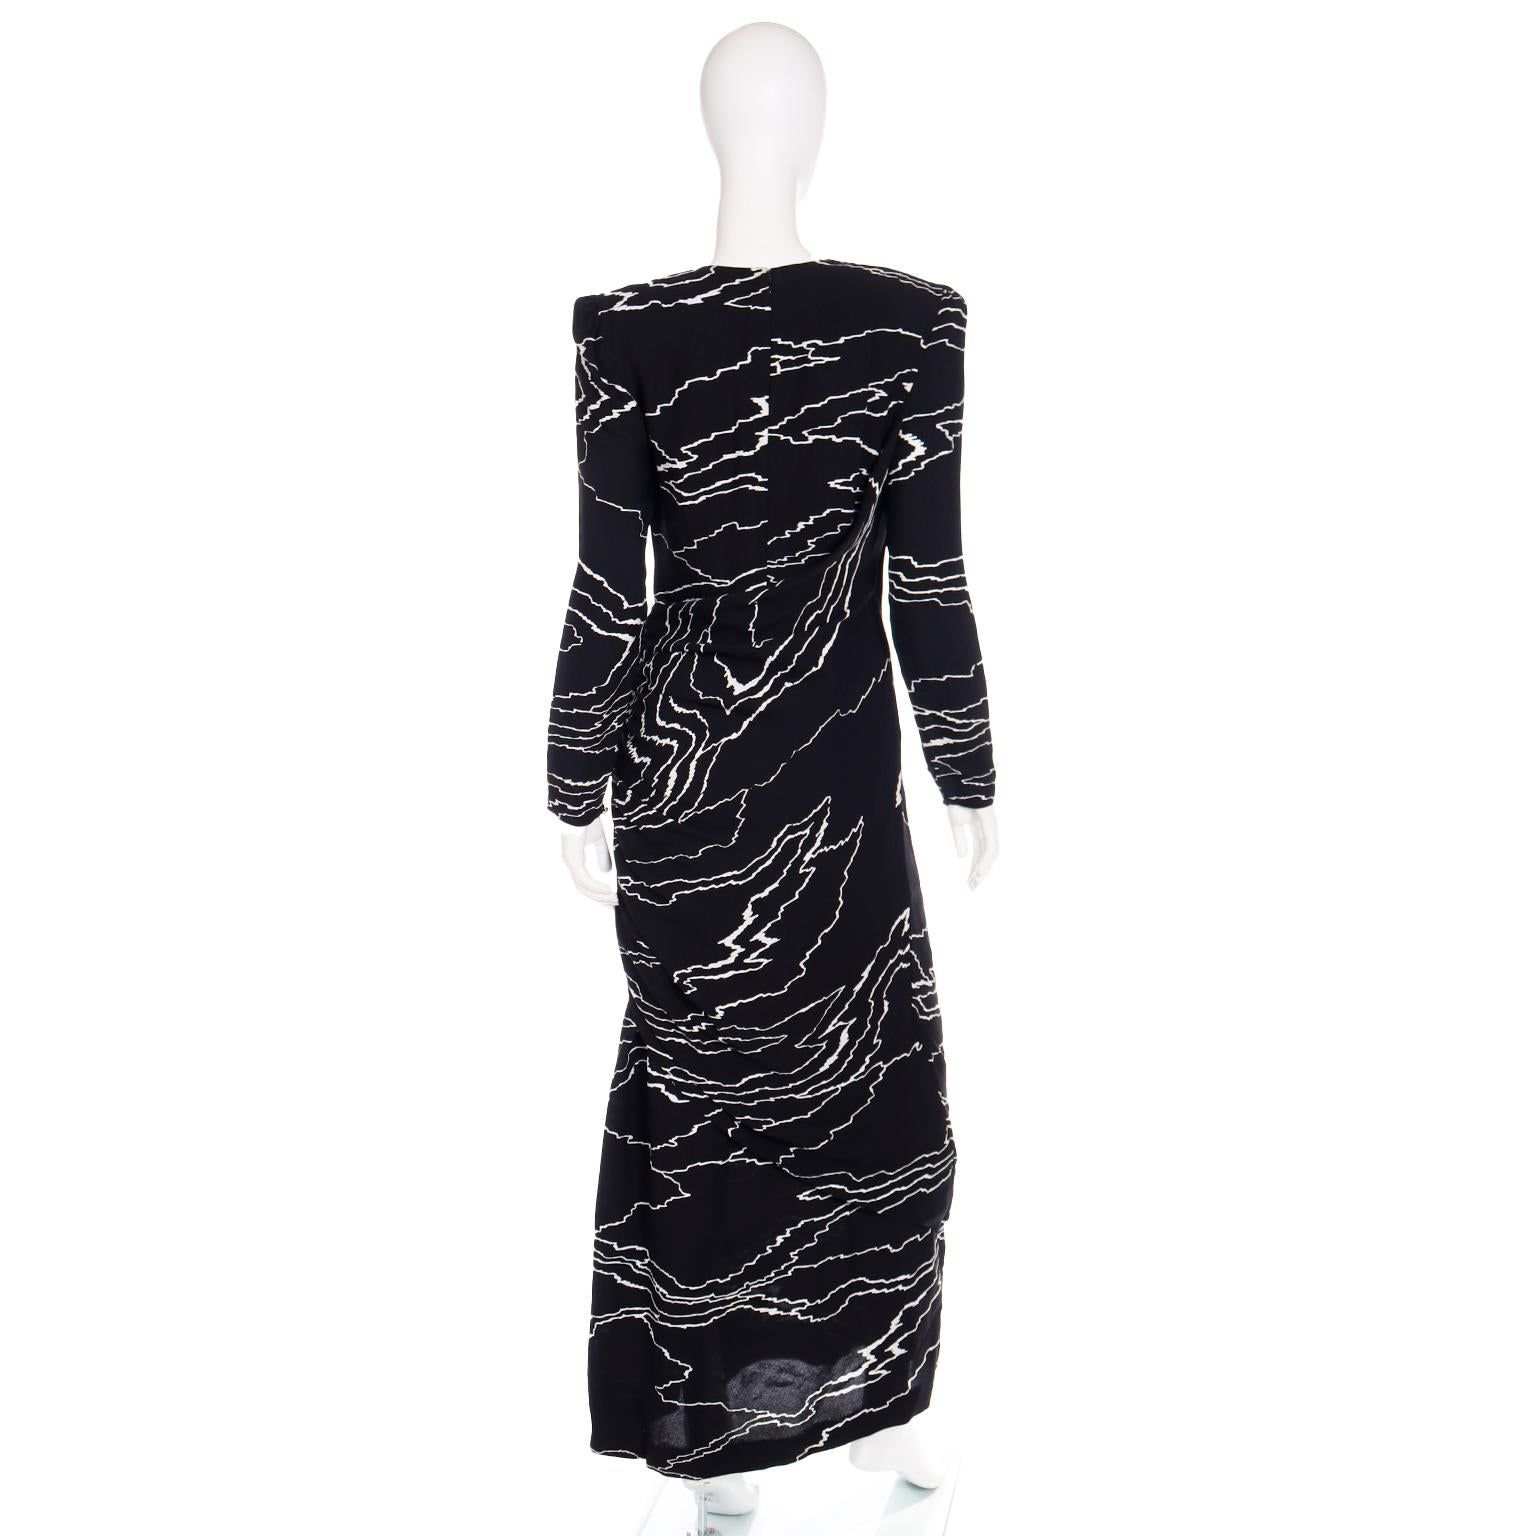 1985 Bill Blass Vintage Runway Dress Abstract Black White Evening Gown Draping For Sale 4